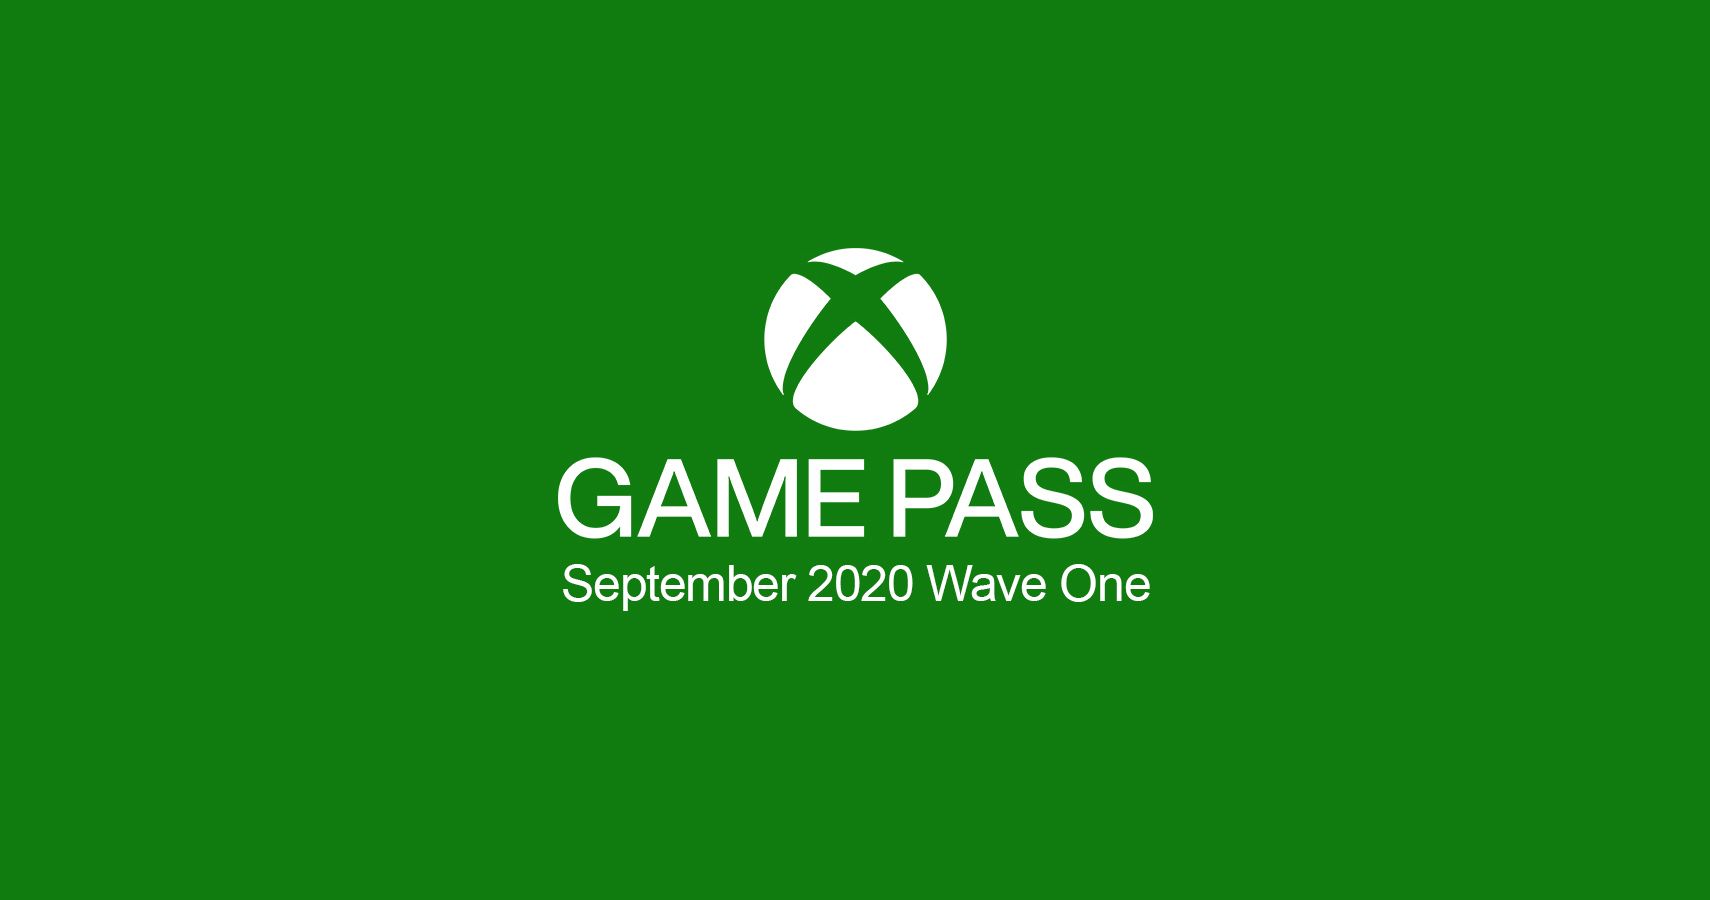 Xbox Game Pass monthly additions include Crusaders Kings III